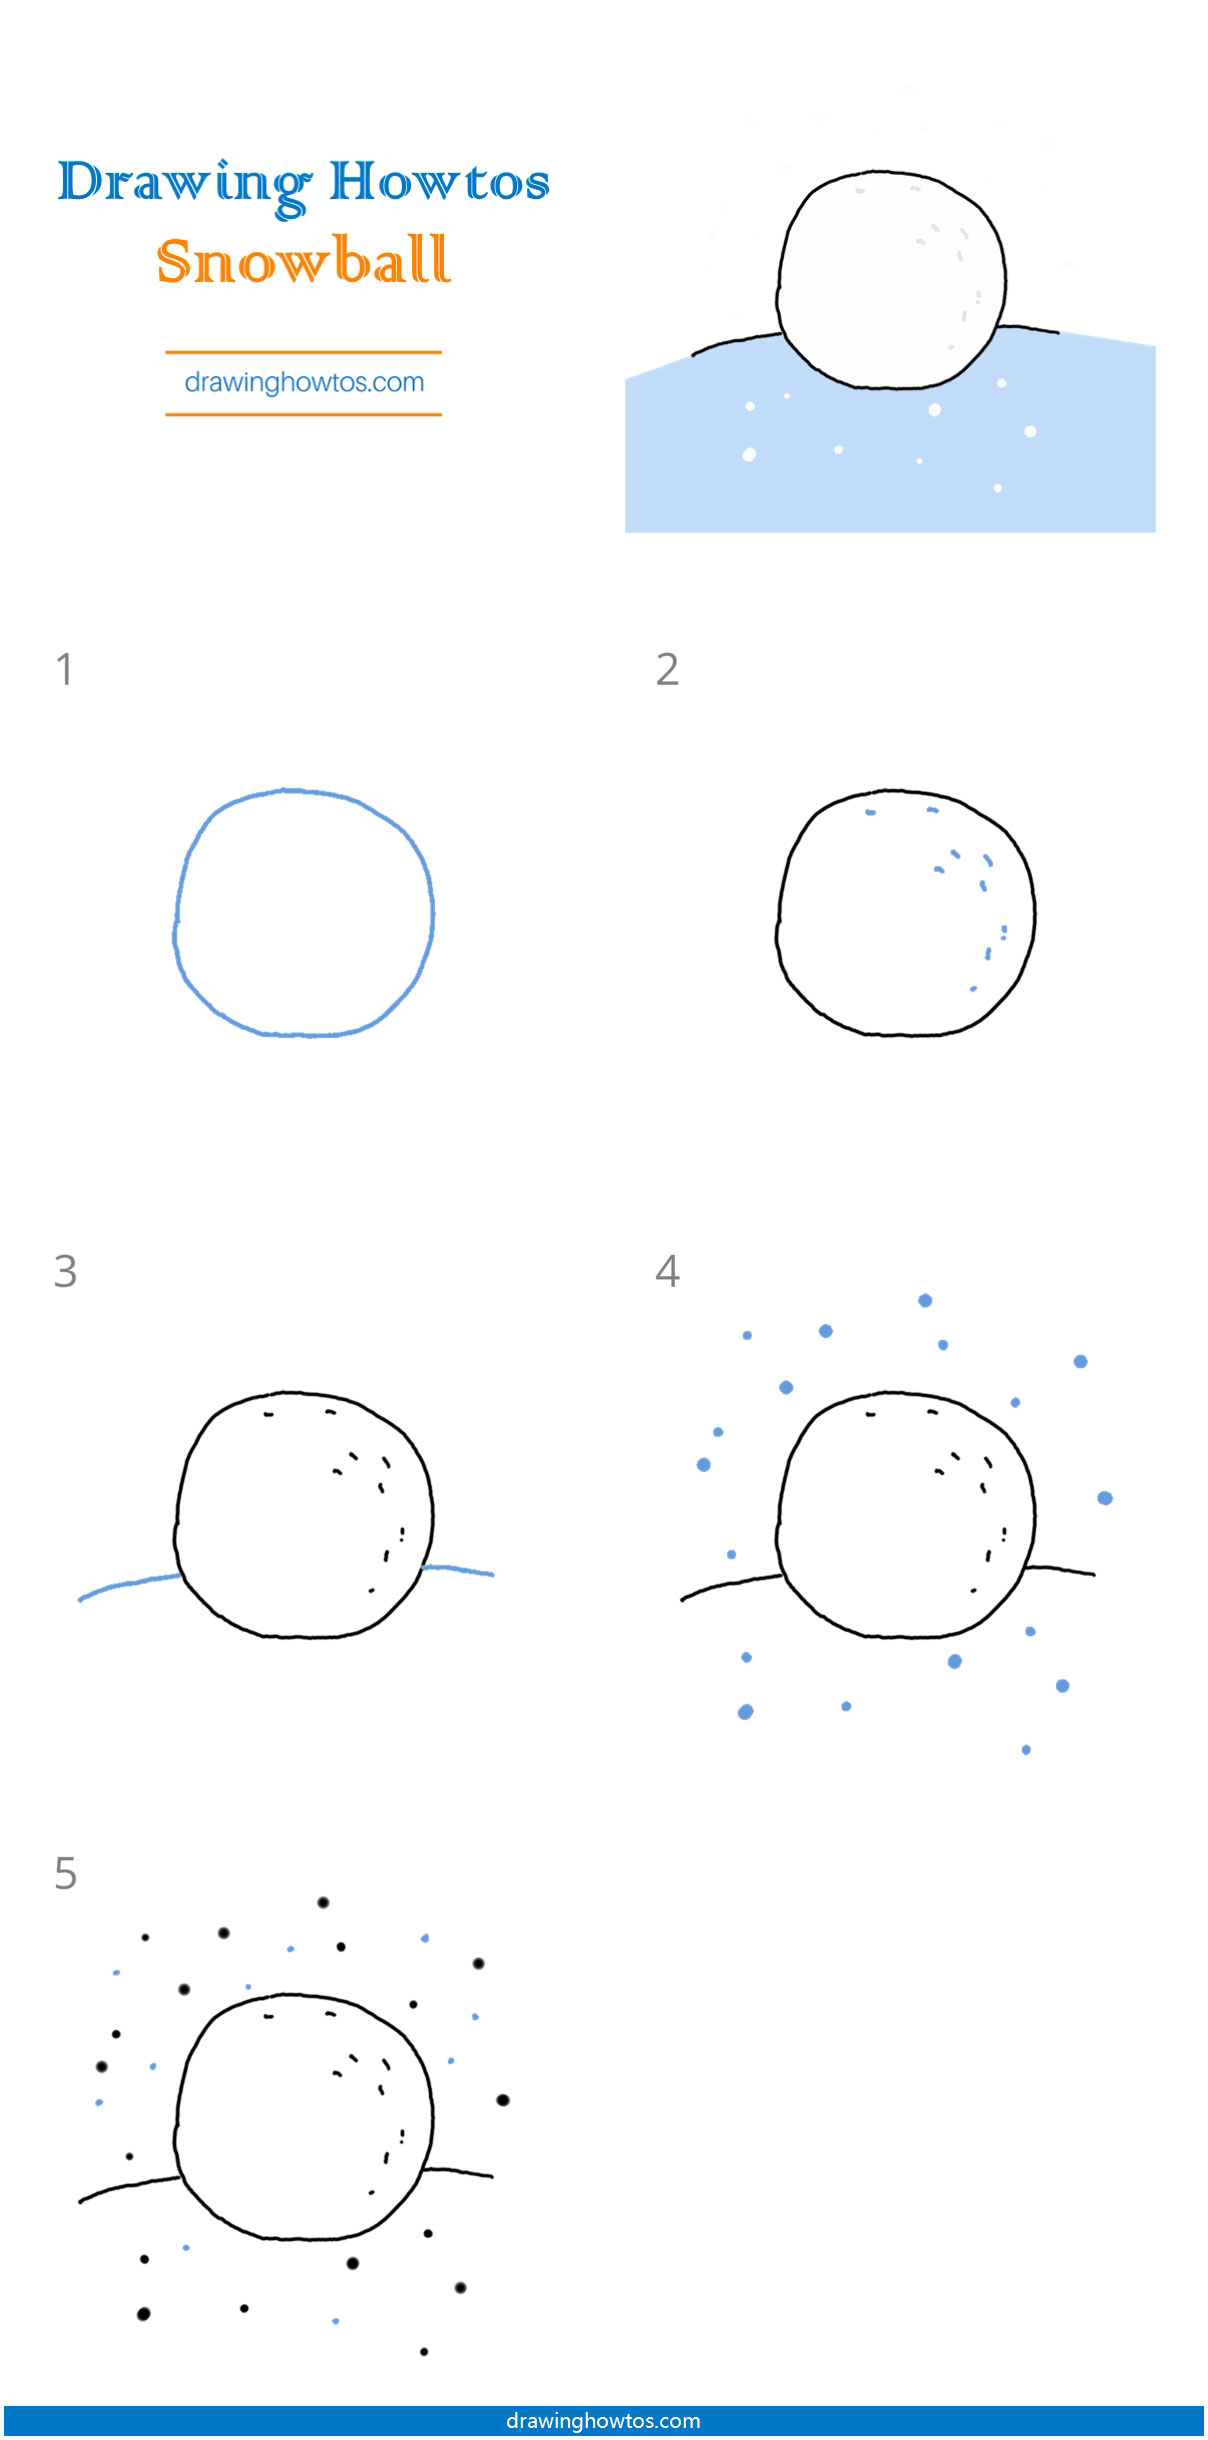 How to Draw a Snowball Step by Step